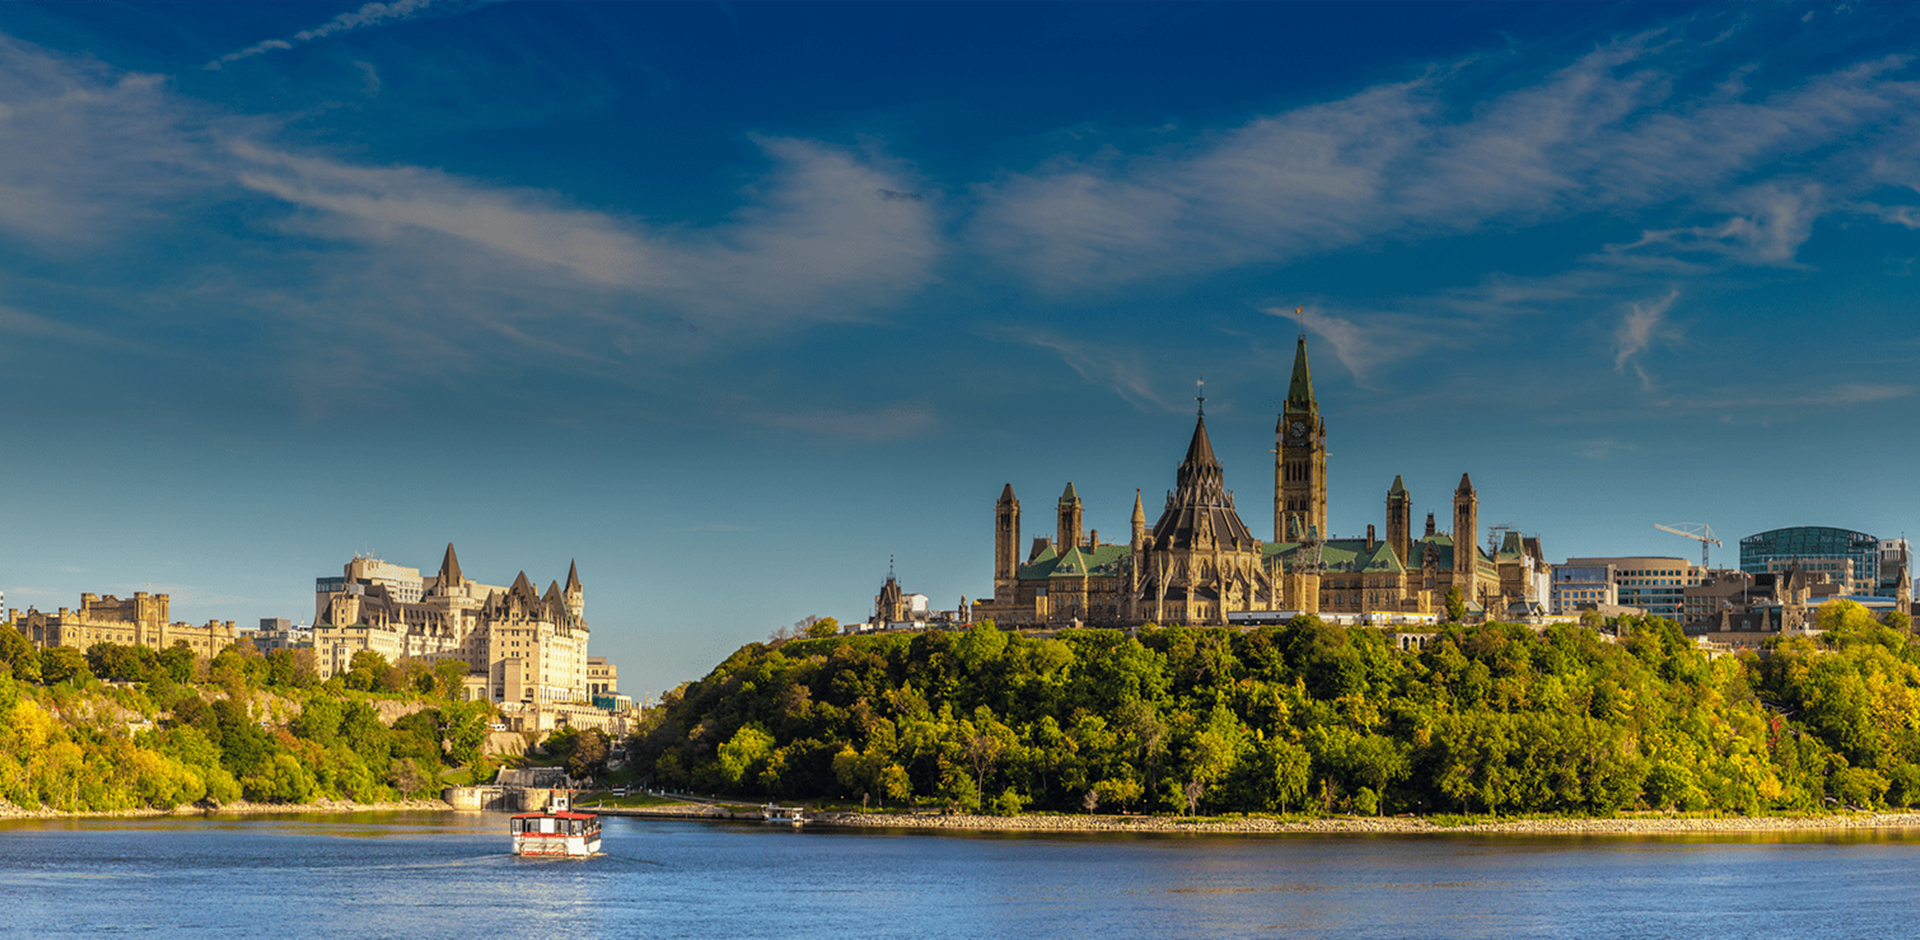 Look from the water on the Parliament, boat and other surroundings, Ottawa, ON